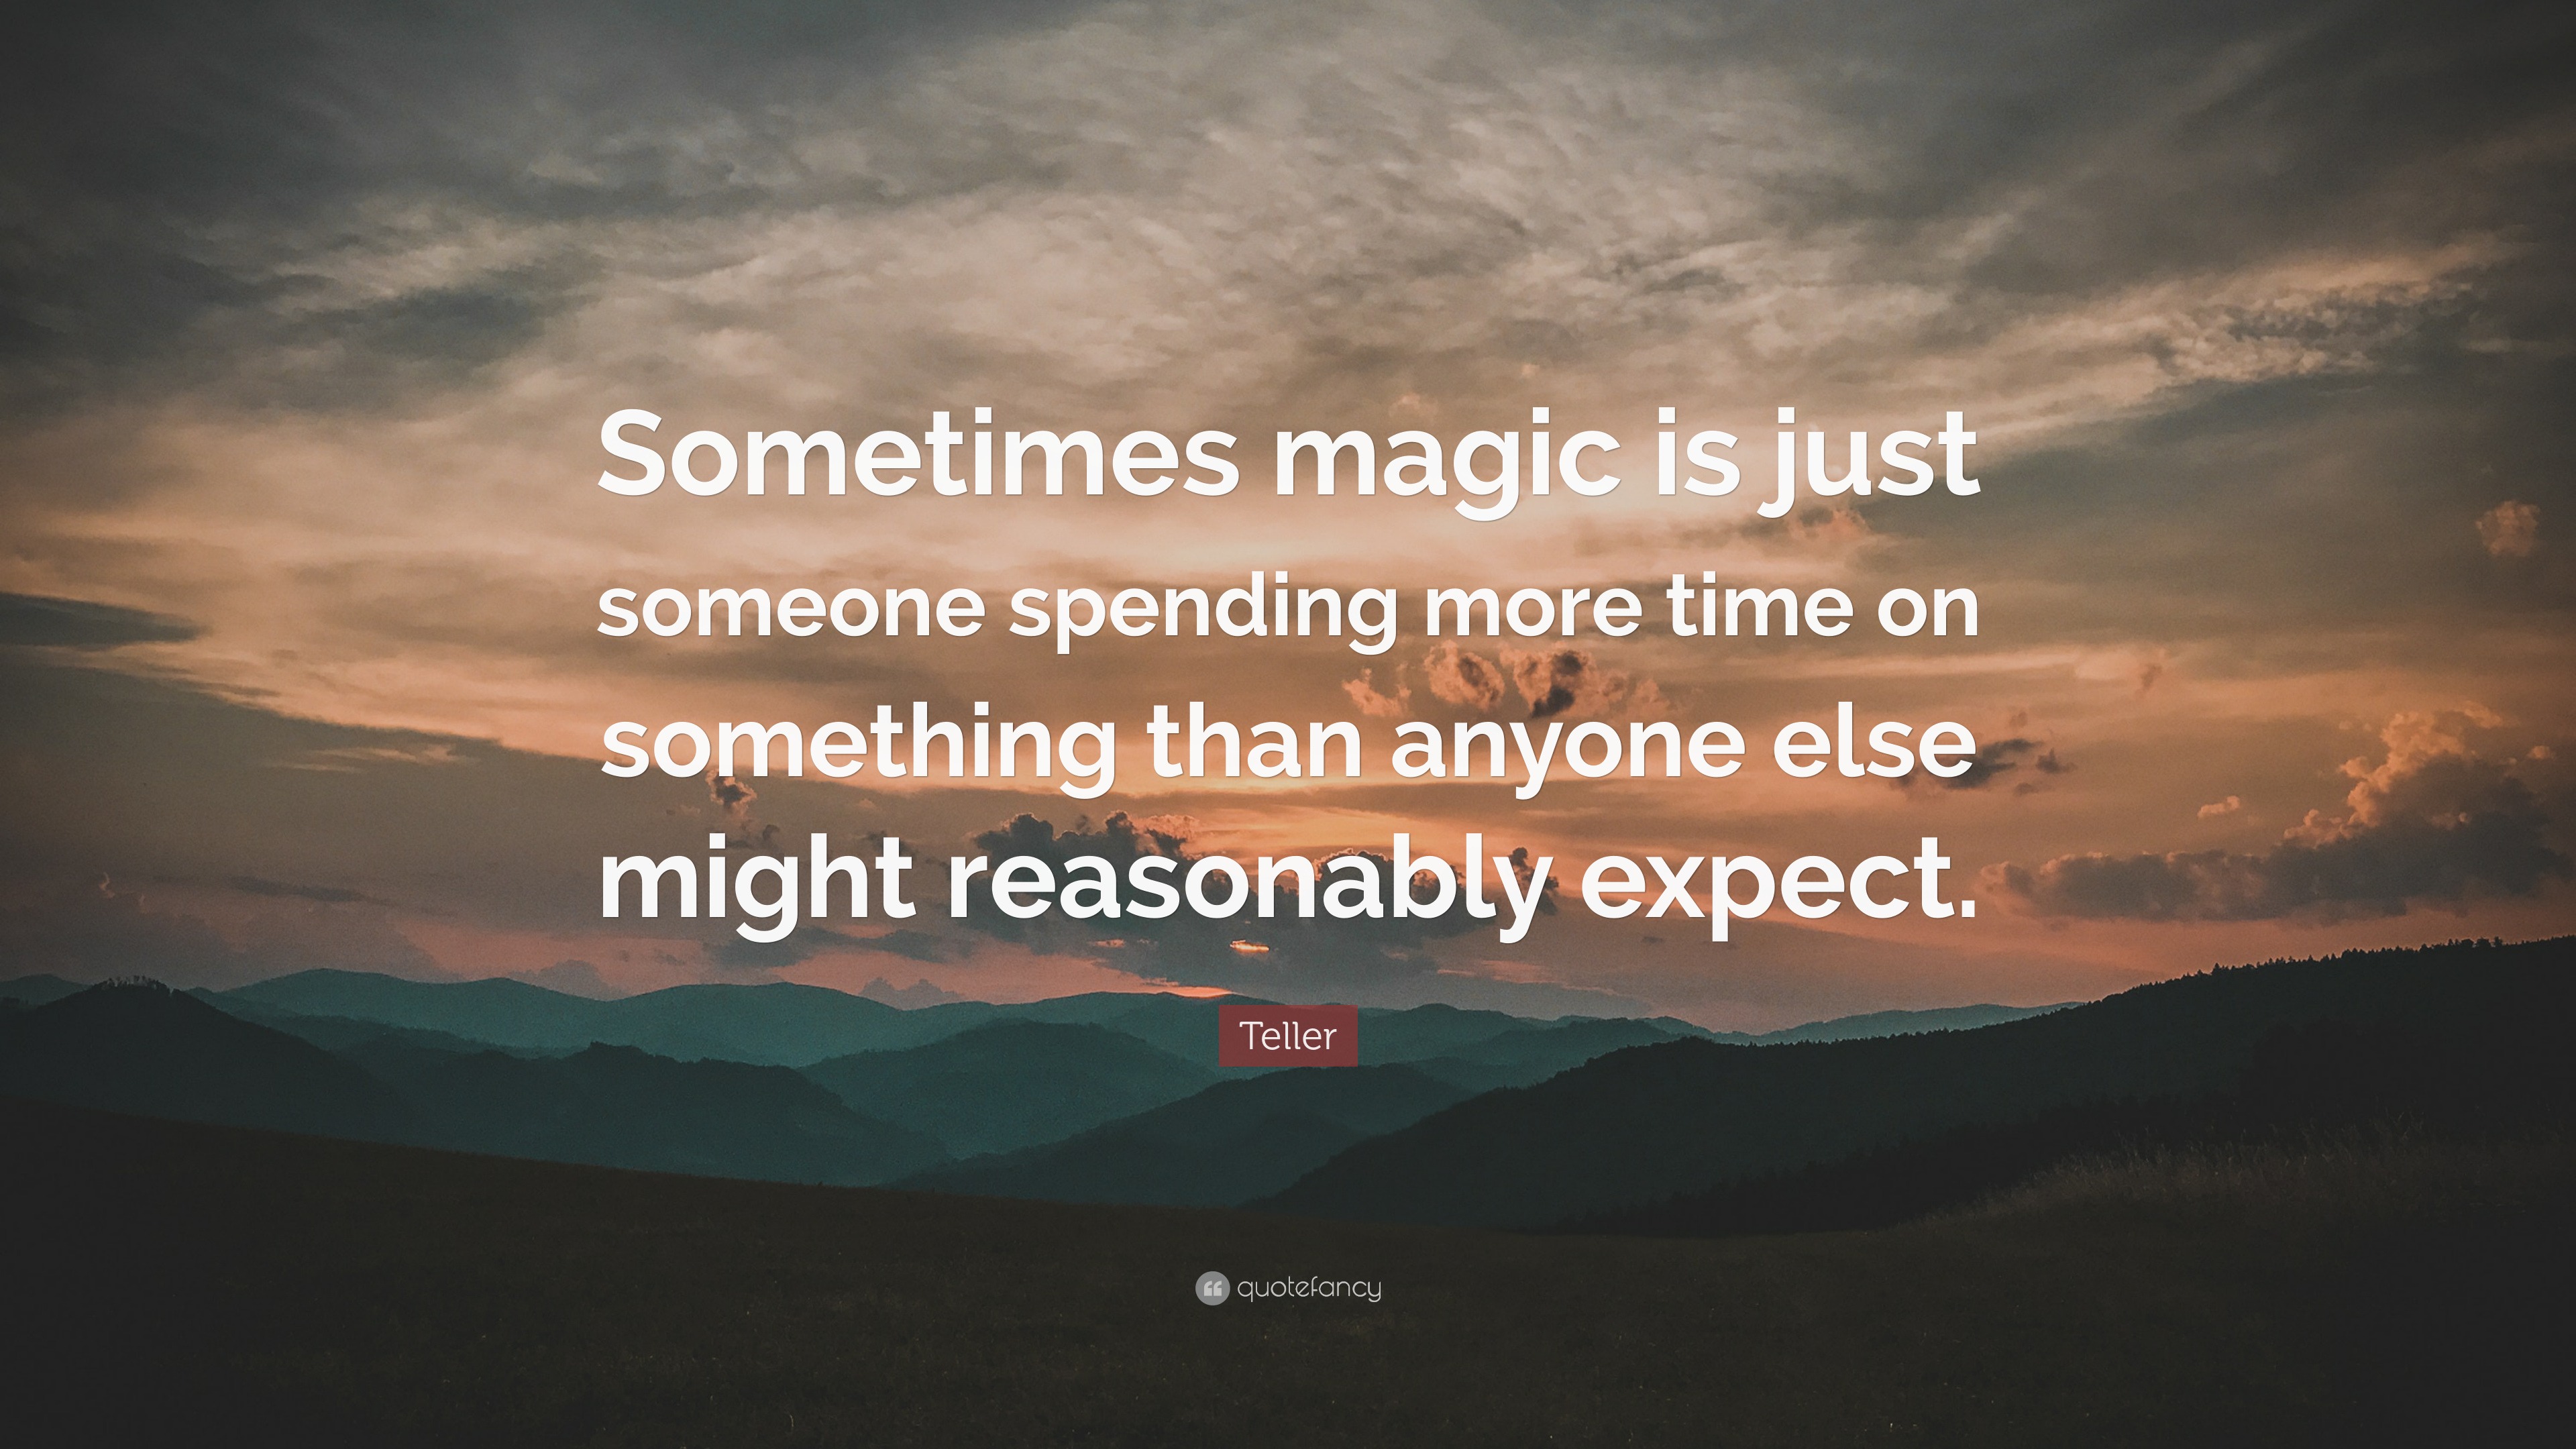 Teller Quote “sometimes Magic Is Just Someone Spending More Time On Something Than Anyone Else 4042